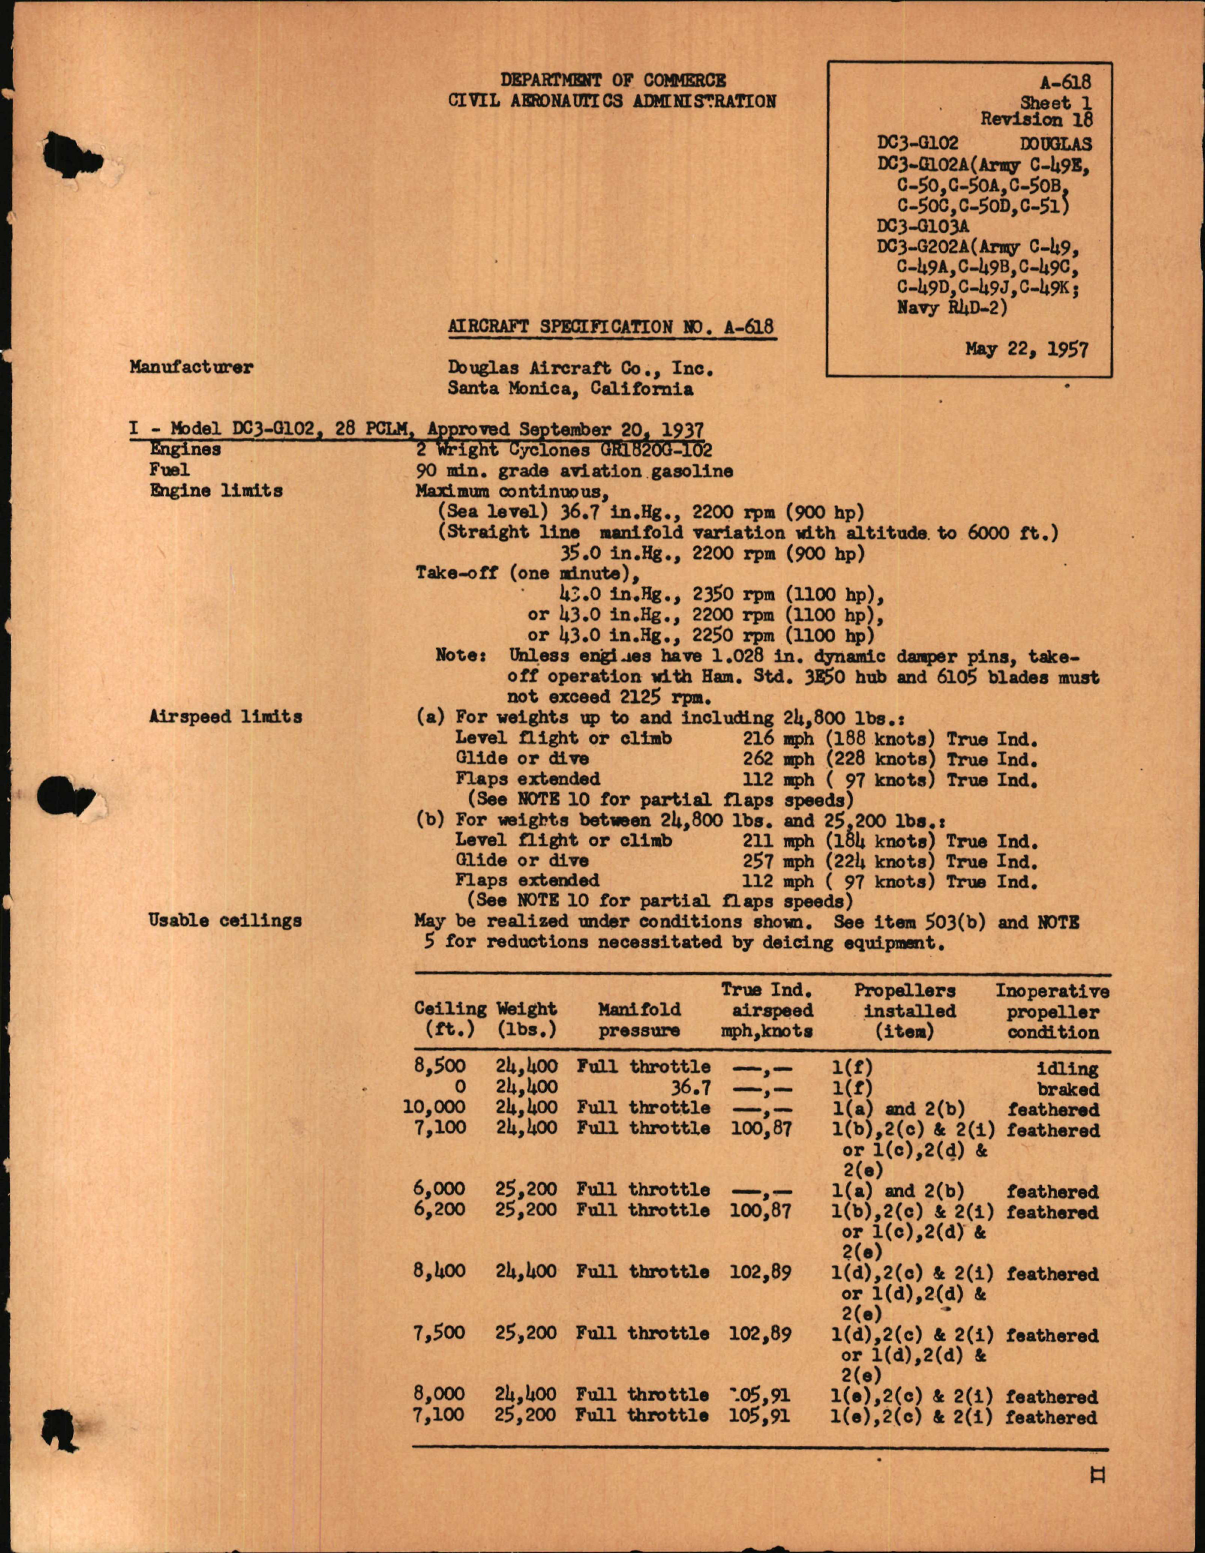 Sample page 1 from AirCorps Library document: DC3, C-49 and C-50 Series, Revision 18